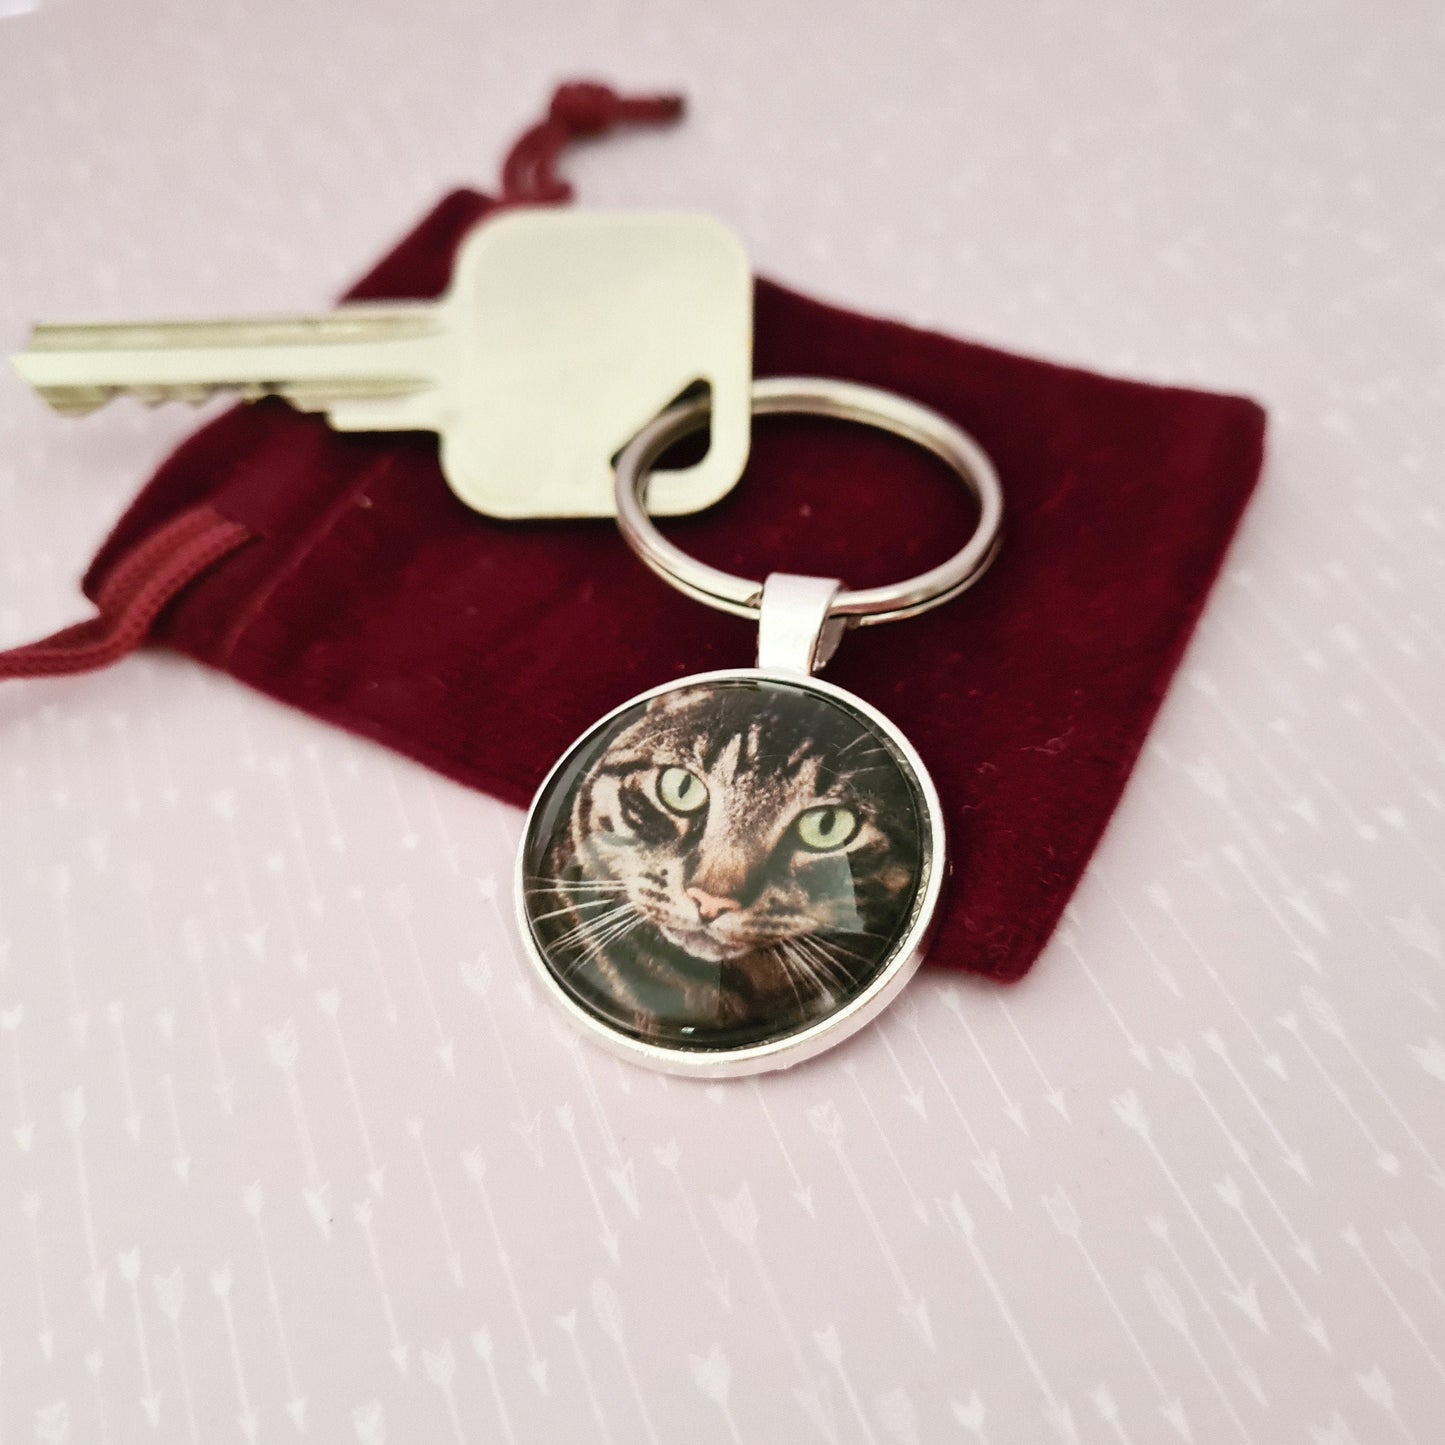 Stainless steel keyring with personalised pet photo set in glass with a decorative key